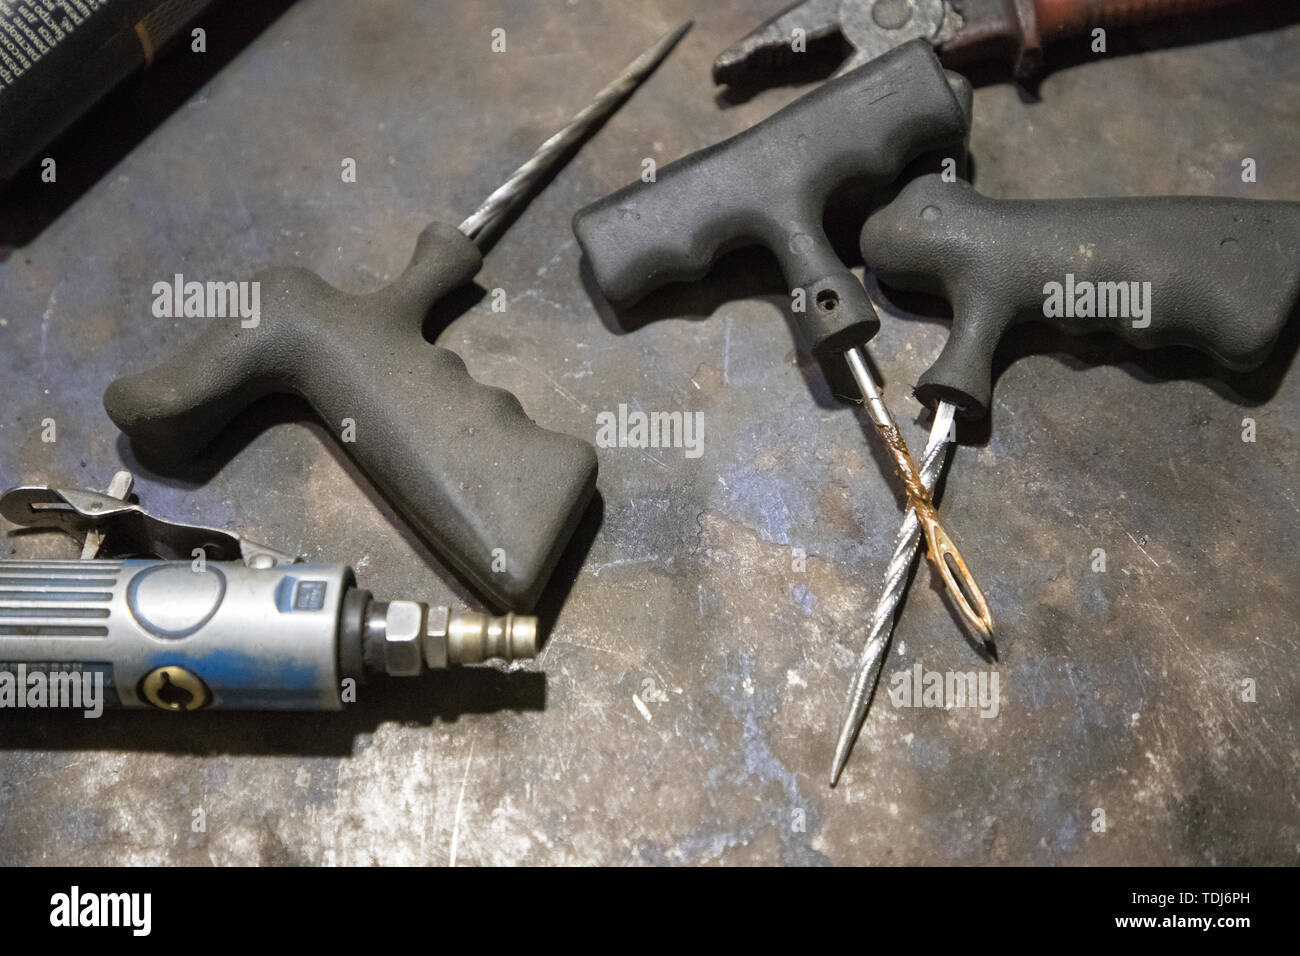 special tools for repairing cars in the garage Stock Photo